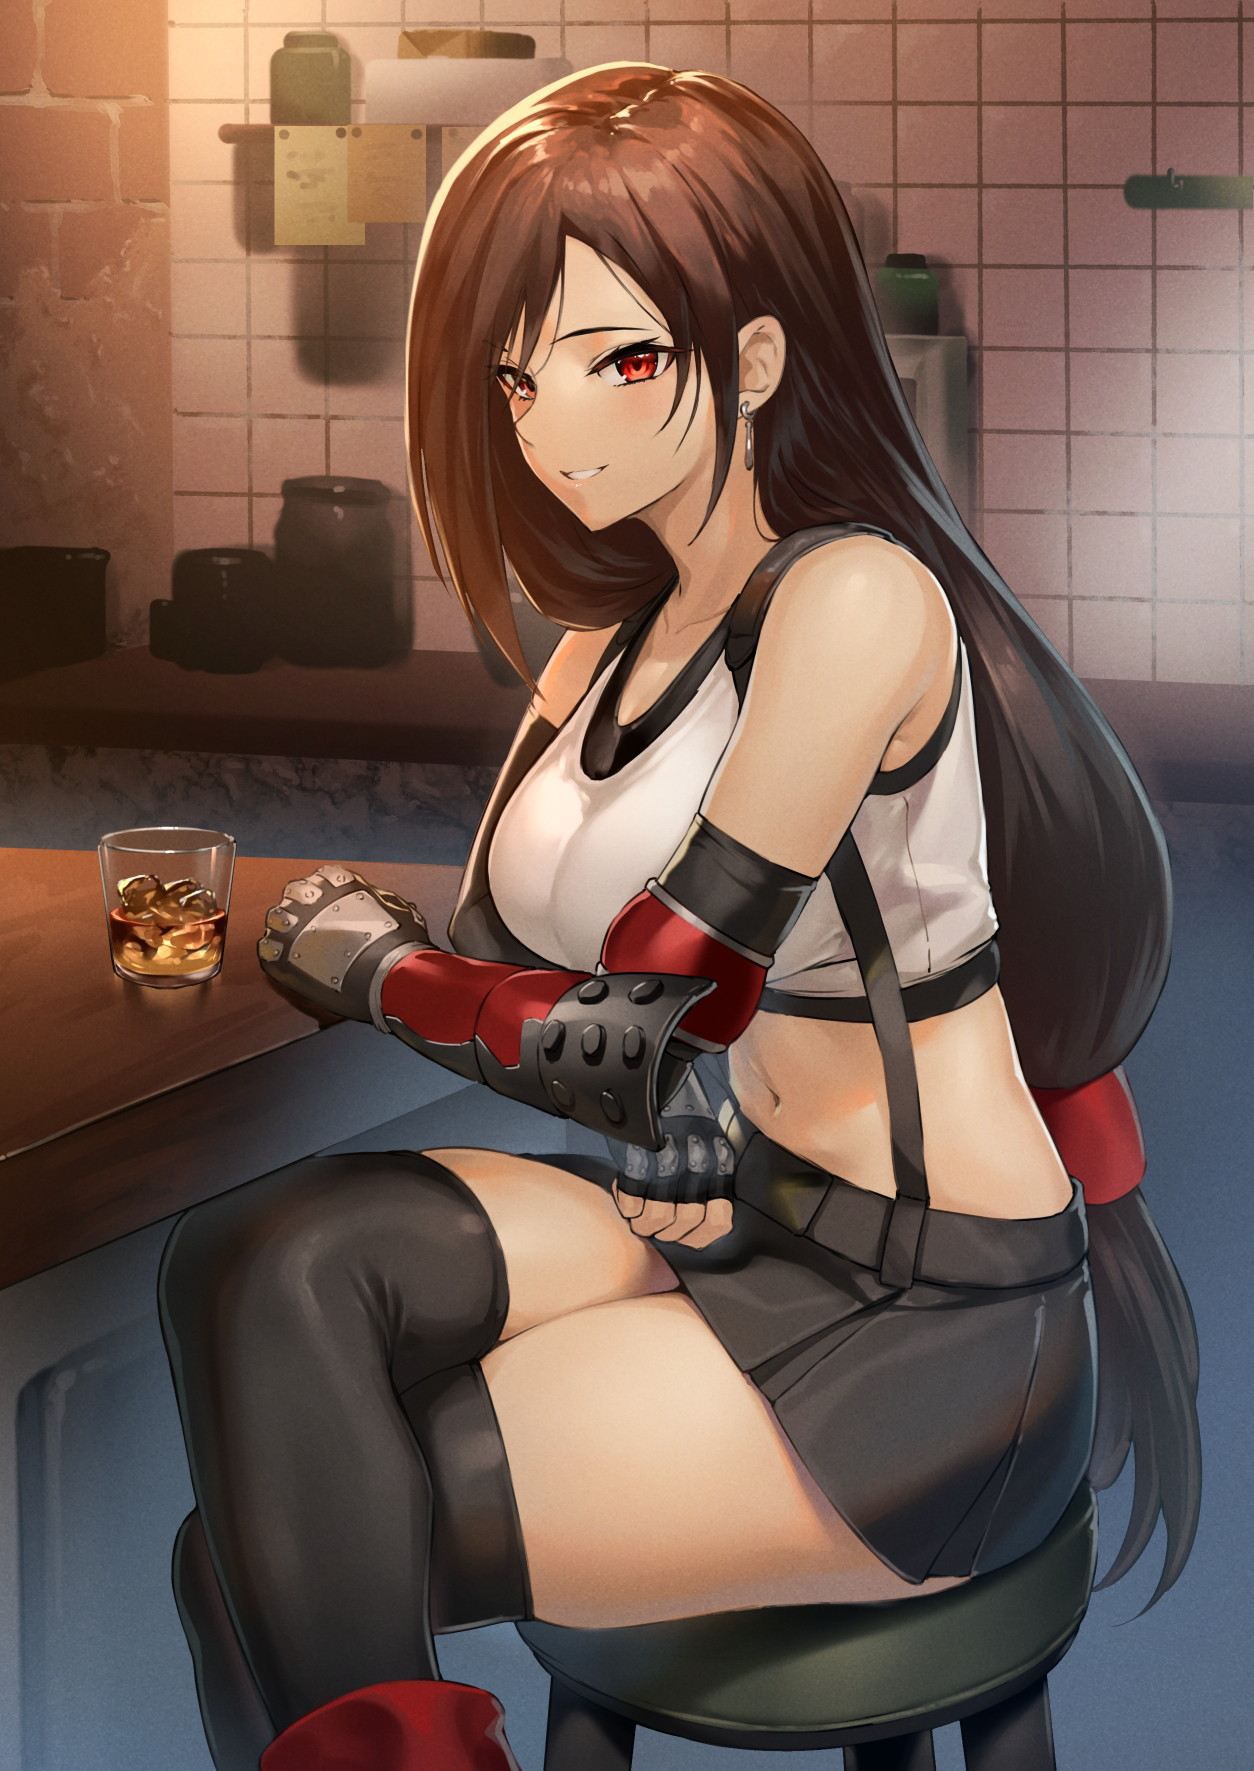 [Final Fantasy] about the second image of Tifa Lockhart too 3